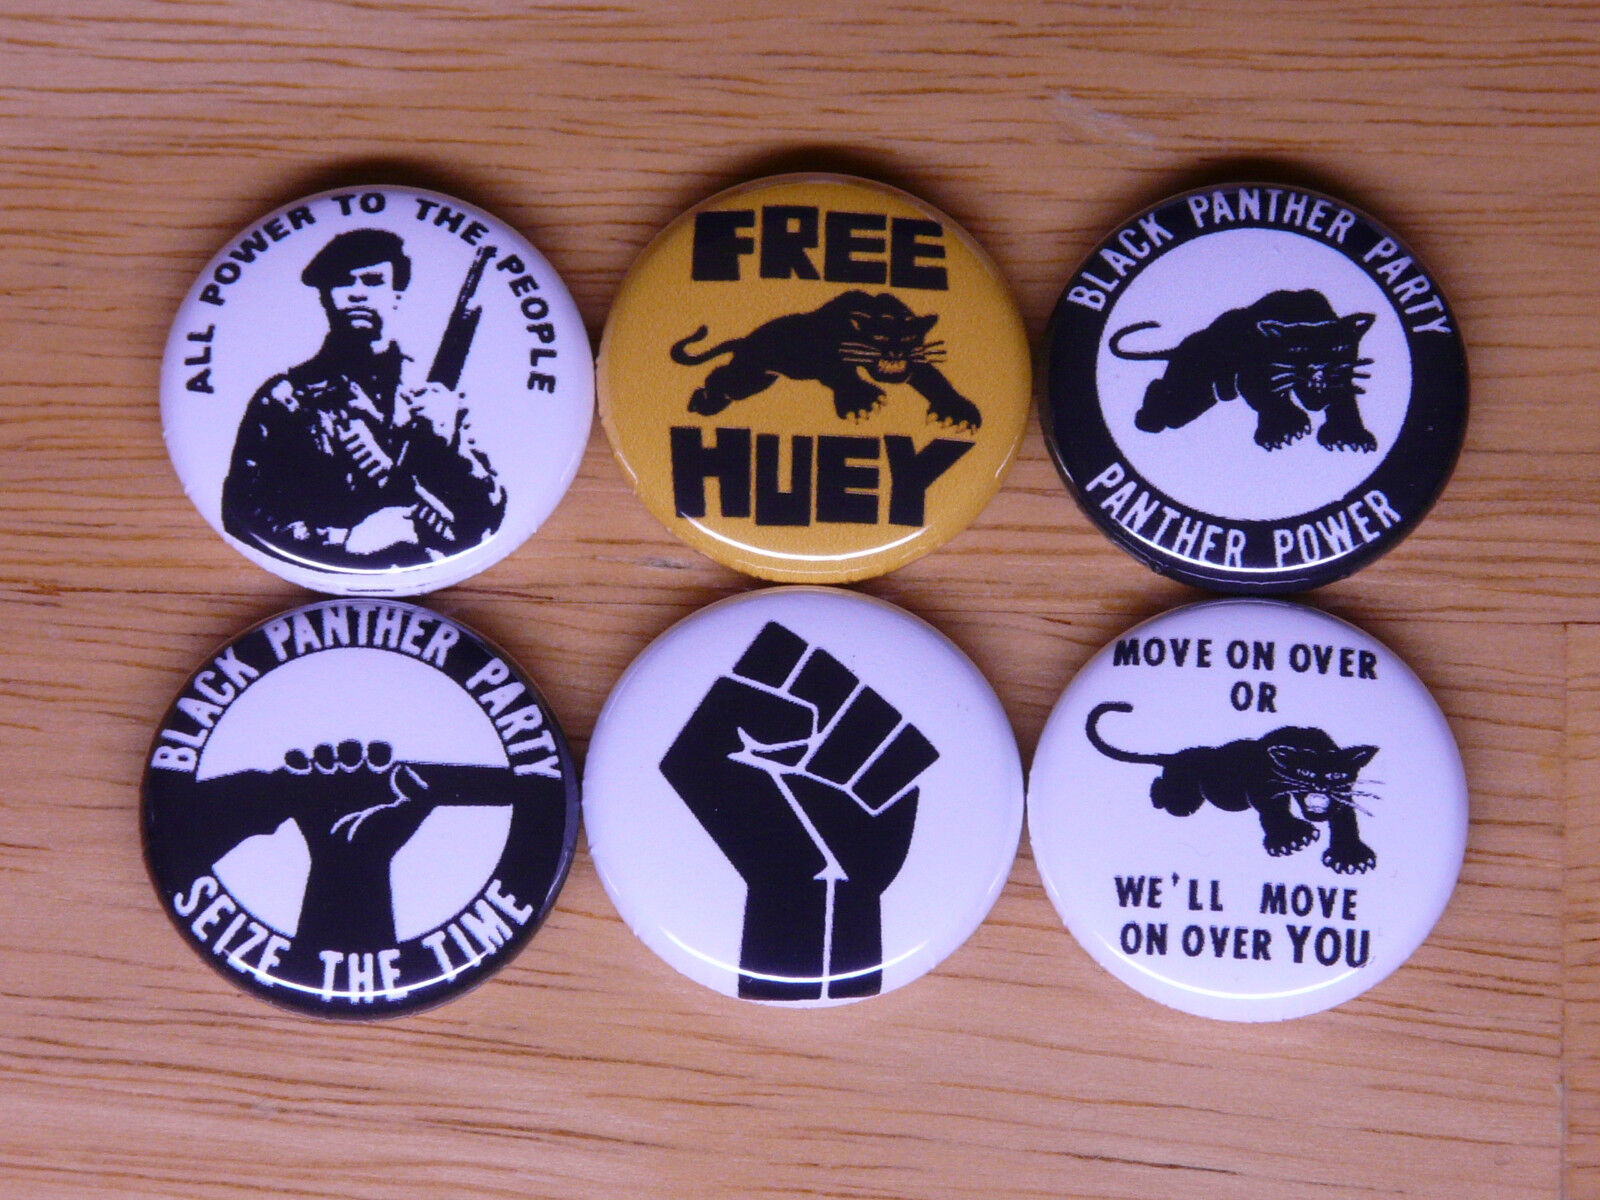 BLACK PANTHER 6 buttons pins badges black power 60s panthers party 